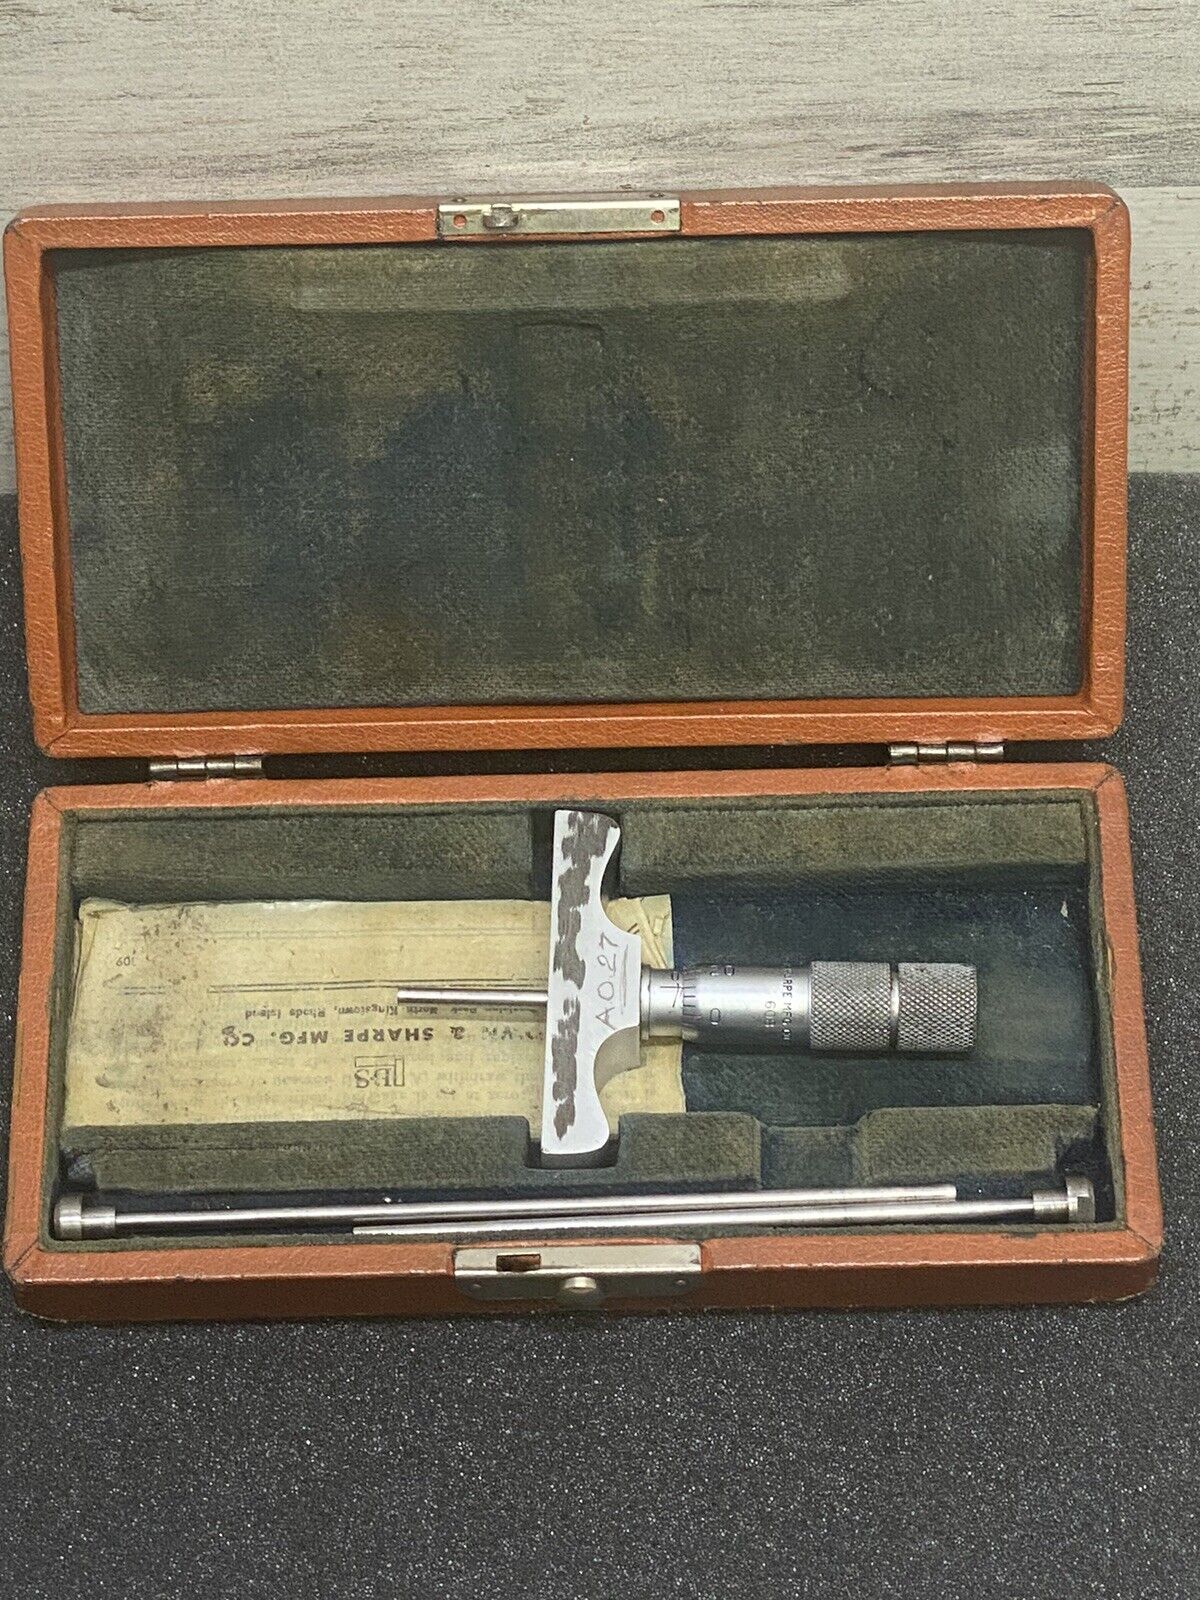 Vintage Brown & Sharpe No. 608 Depth Micrometer Gage Head 0-1” with extra rods